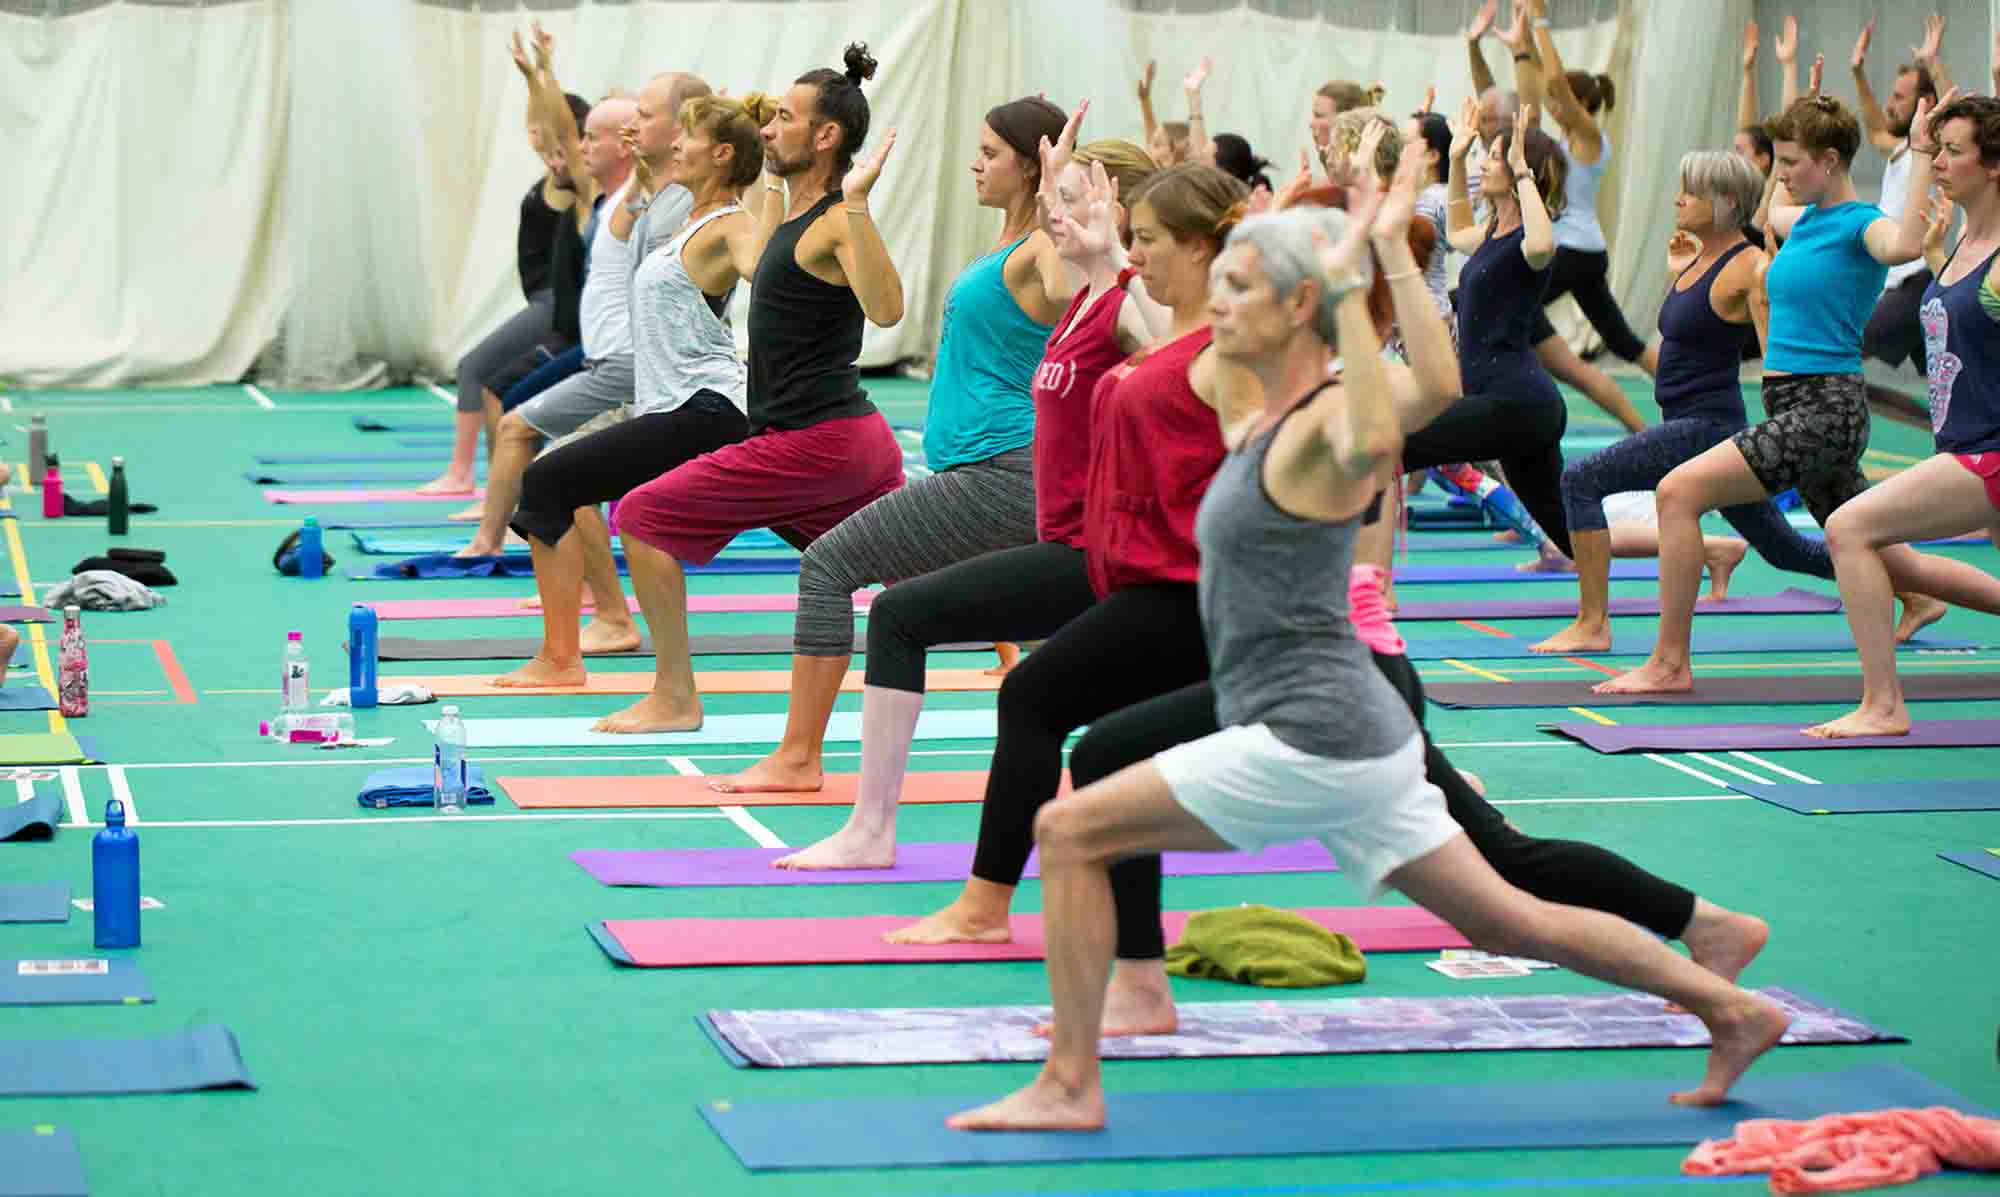 The Virtual Yogafest 2020 is the world's first 14-day yoga